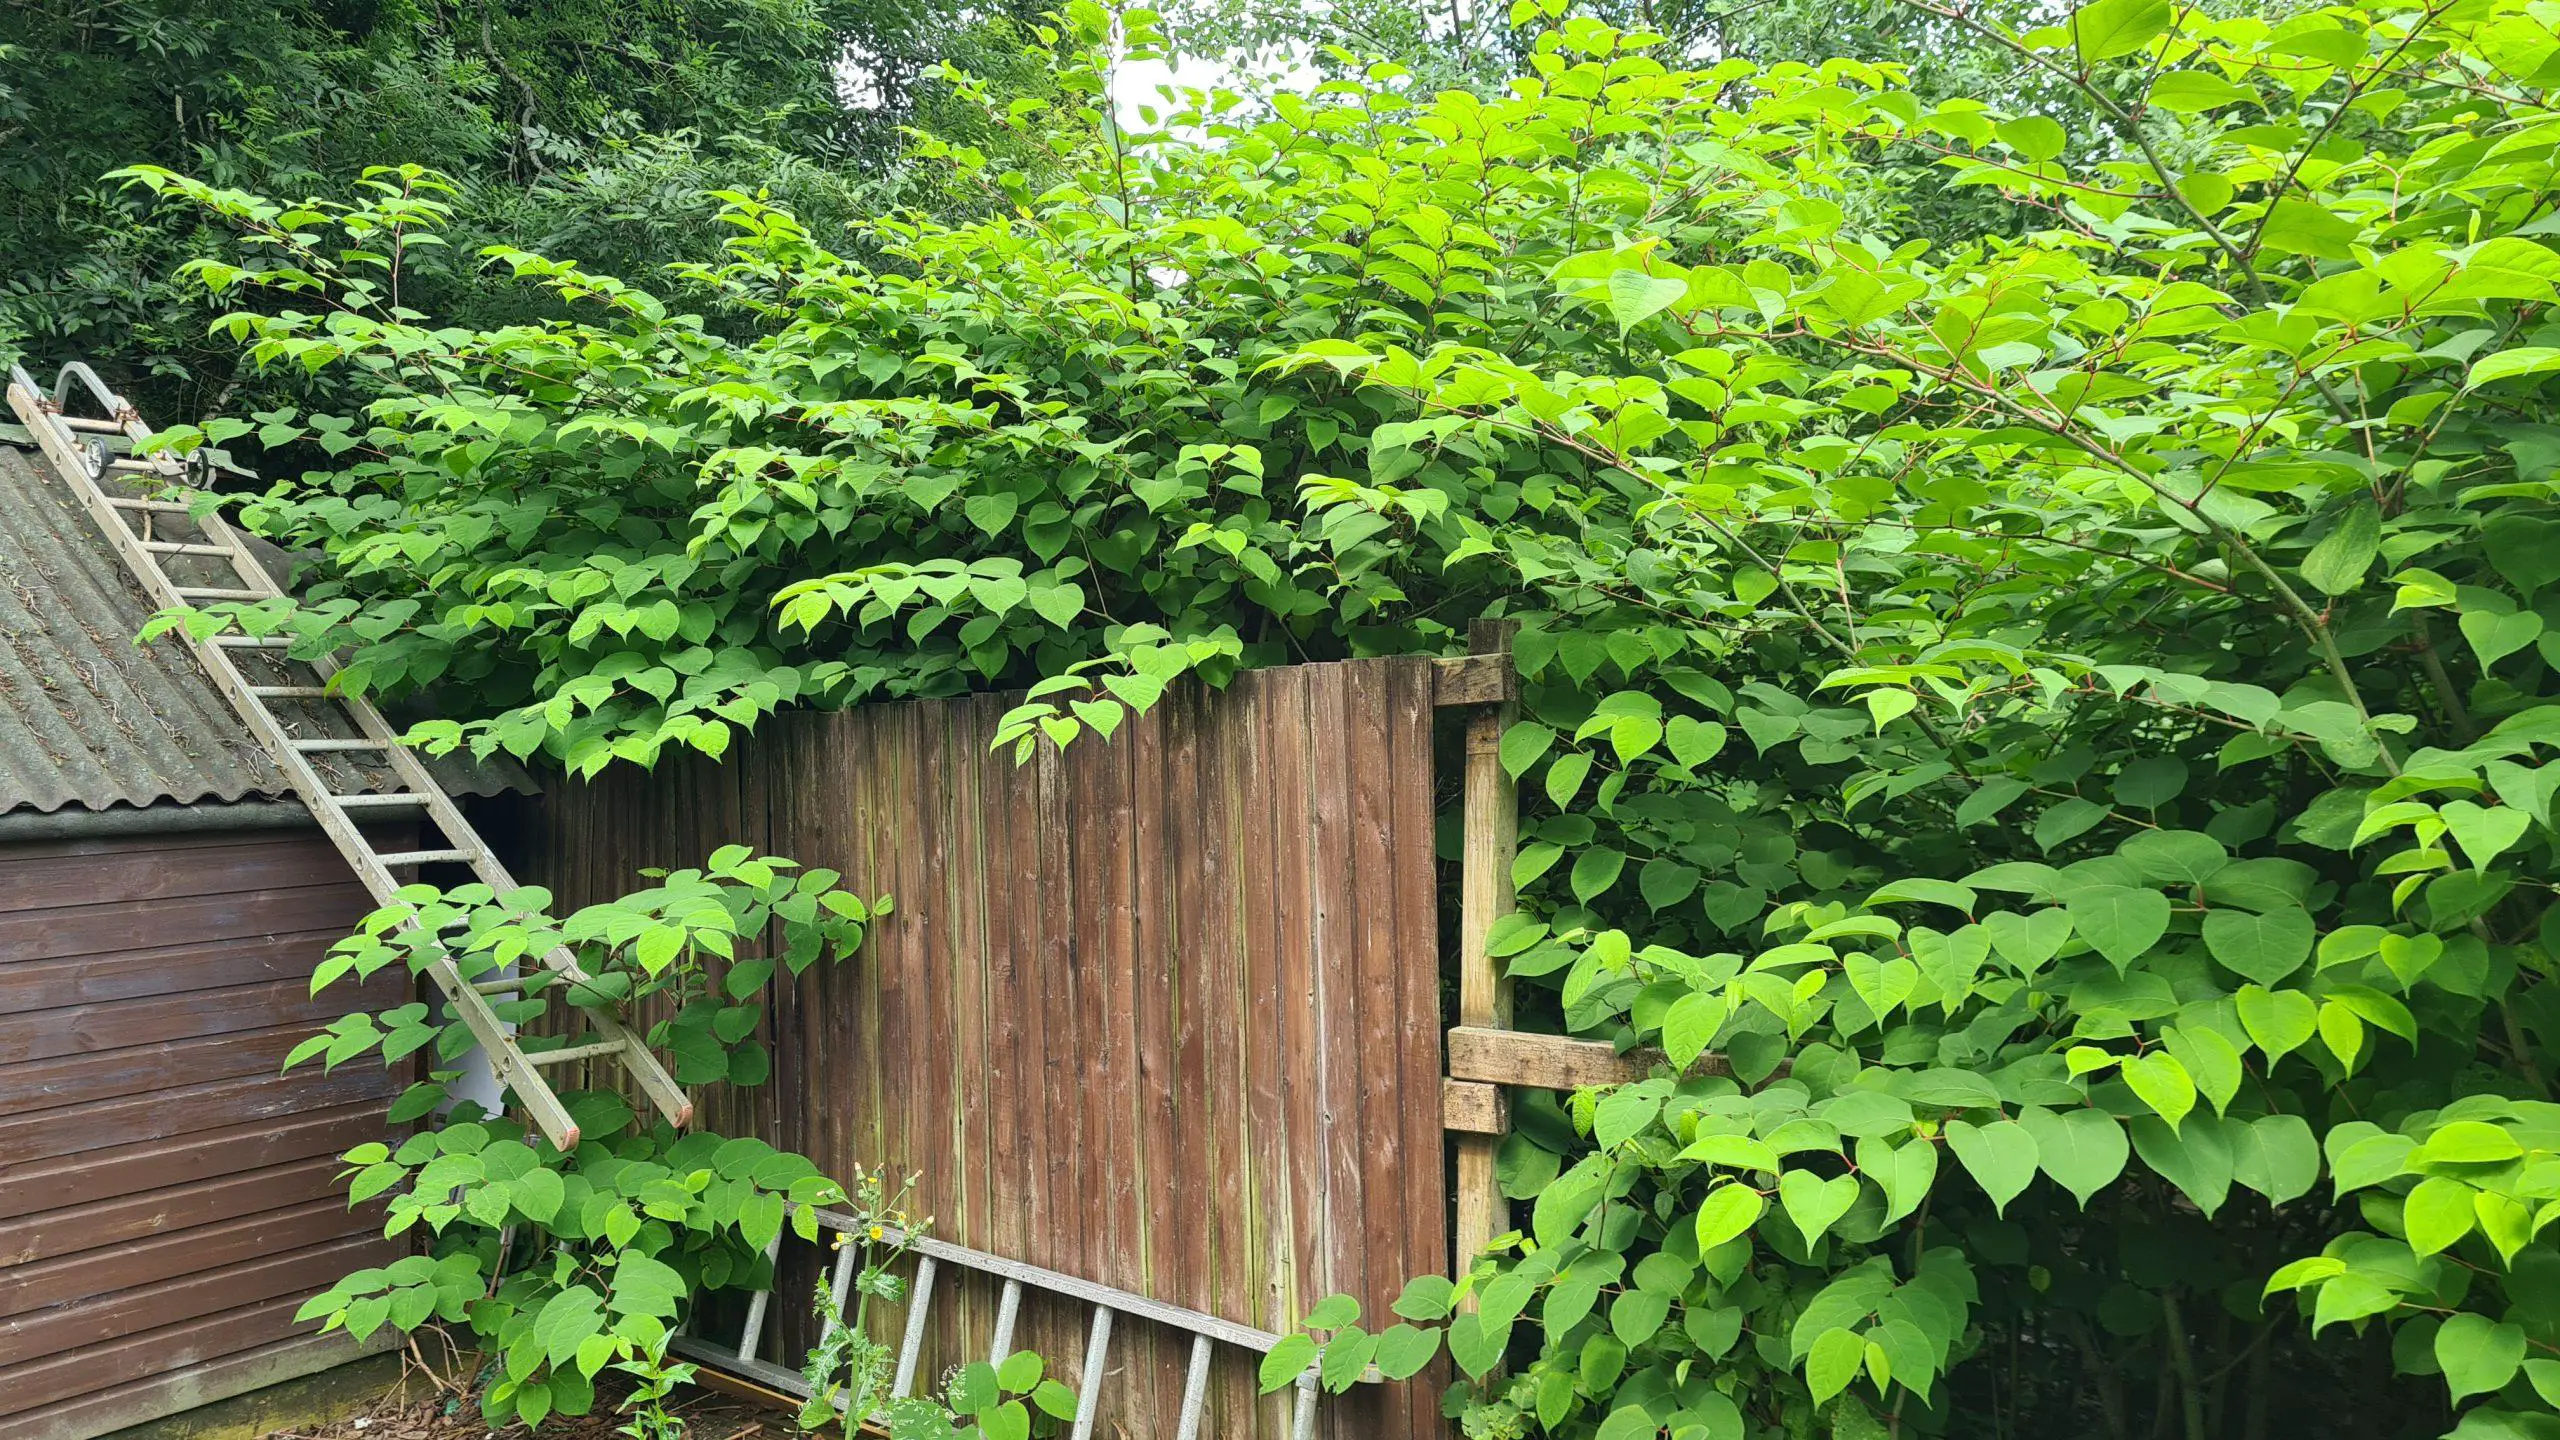 Finding the best method to kill Japanese knotweed on your property scaled